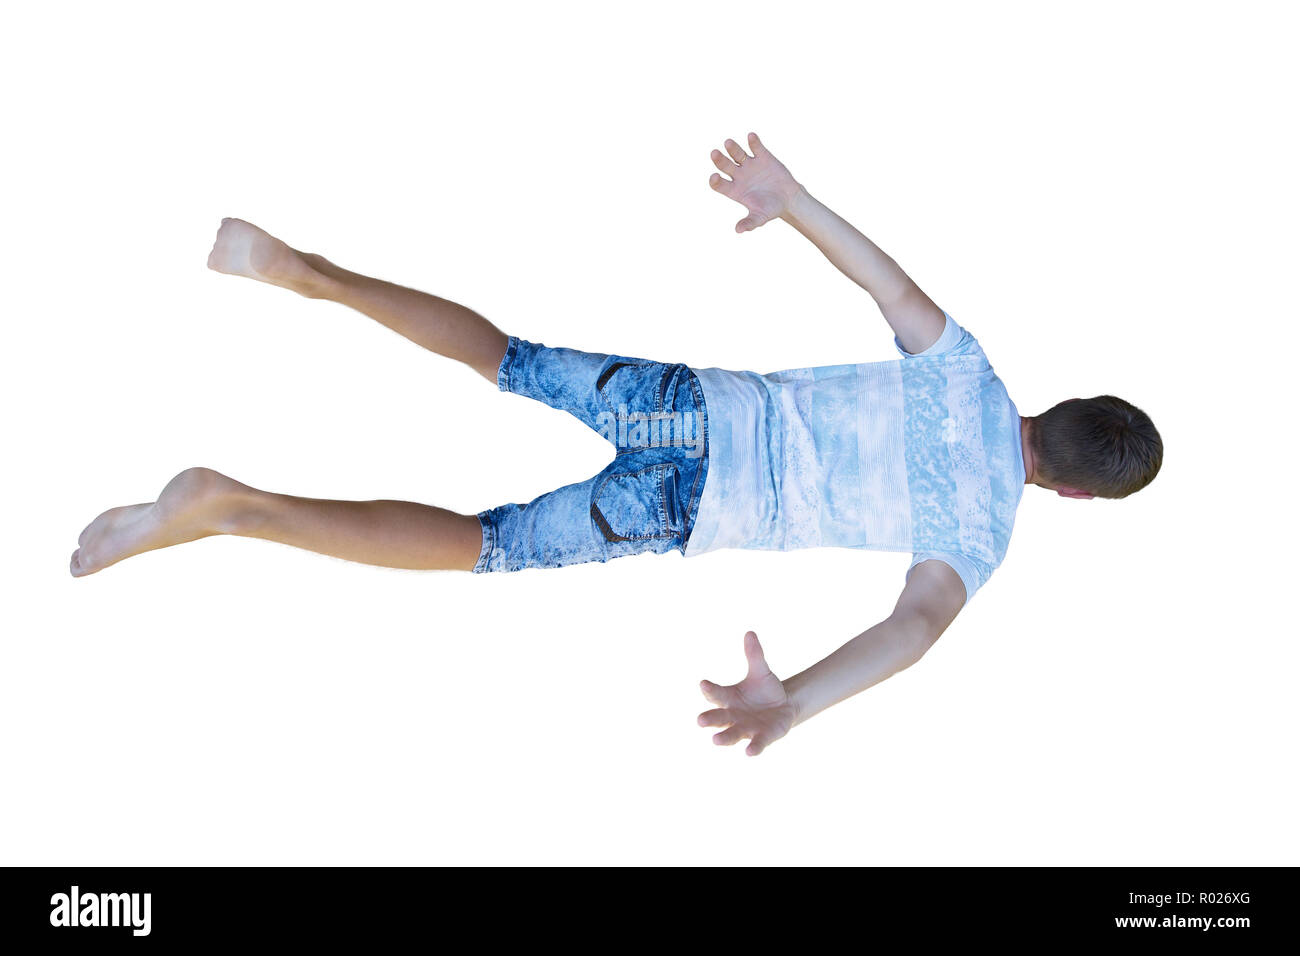 Rear view full length portrait of a young man free falling down hands and legs stretched isolated over white background. Stock Photo